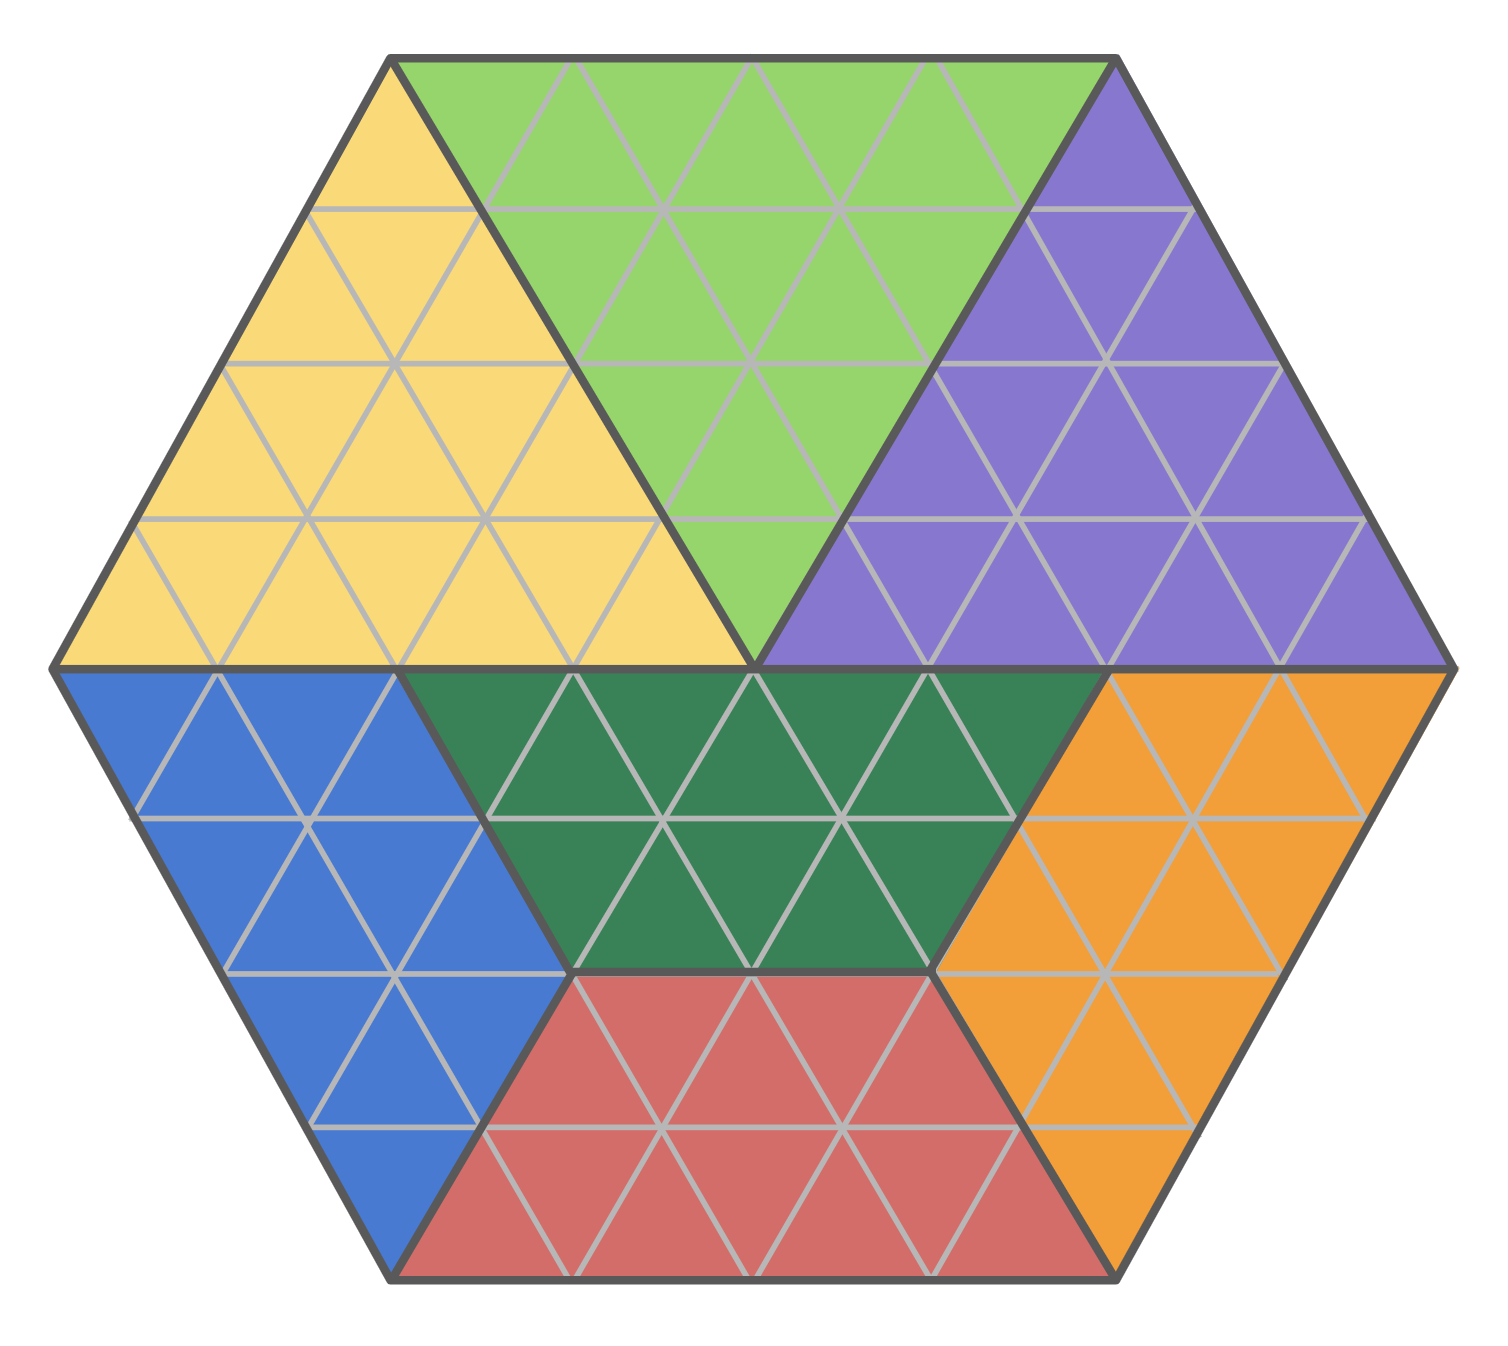 A triangle grid within a hexagon outline (a total of 96 triangles contained within.) The shape is also divided into different coloured fractional parts in a variety of sizes: Blue, green, red, and orange trapezoids that are 12 triangular units each, as well as yellow, green, and purple triangles that are 16 triangular units each.